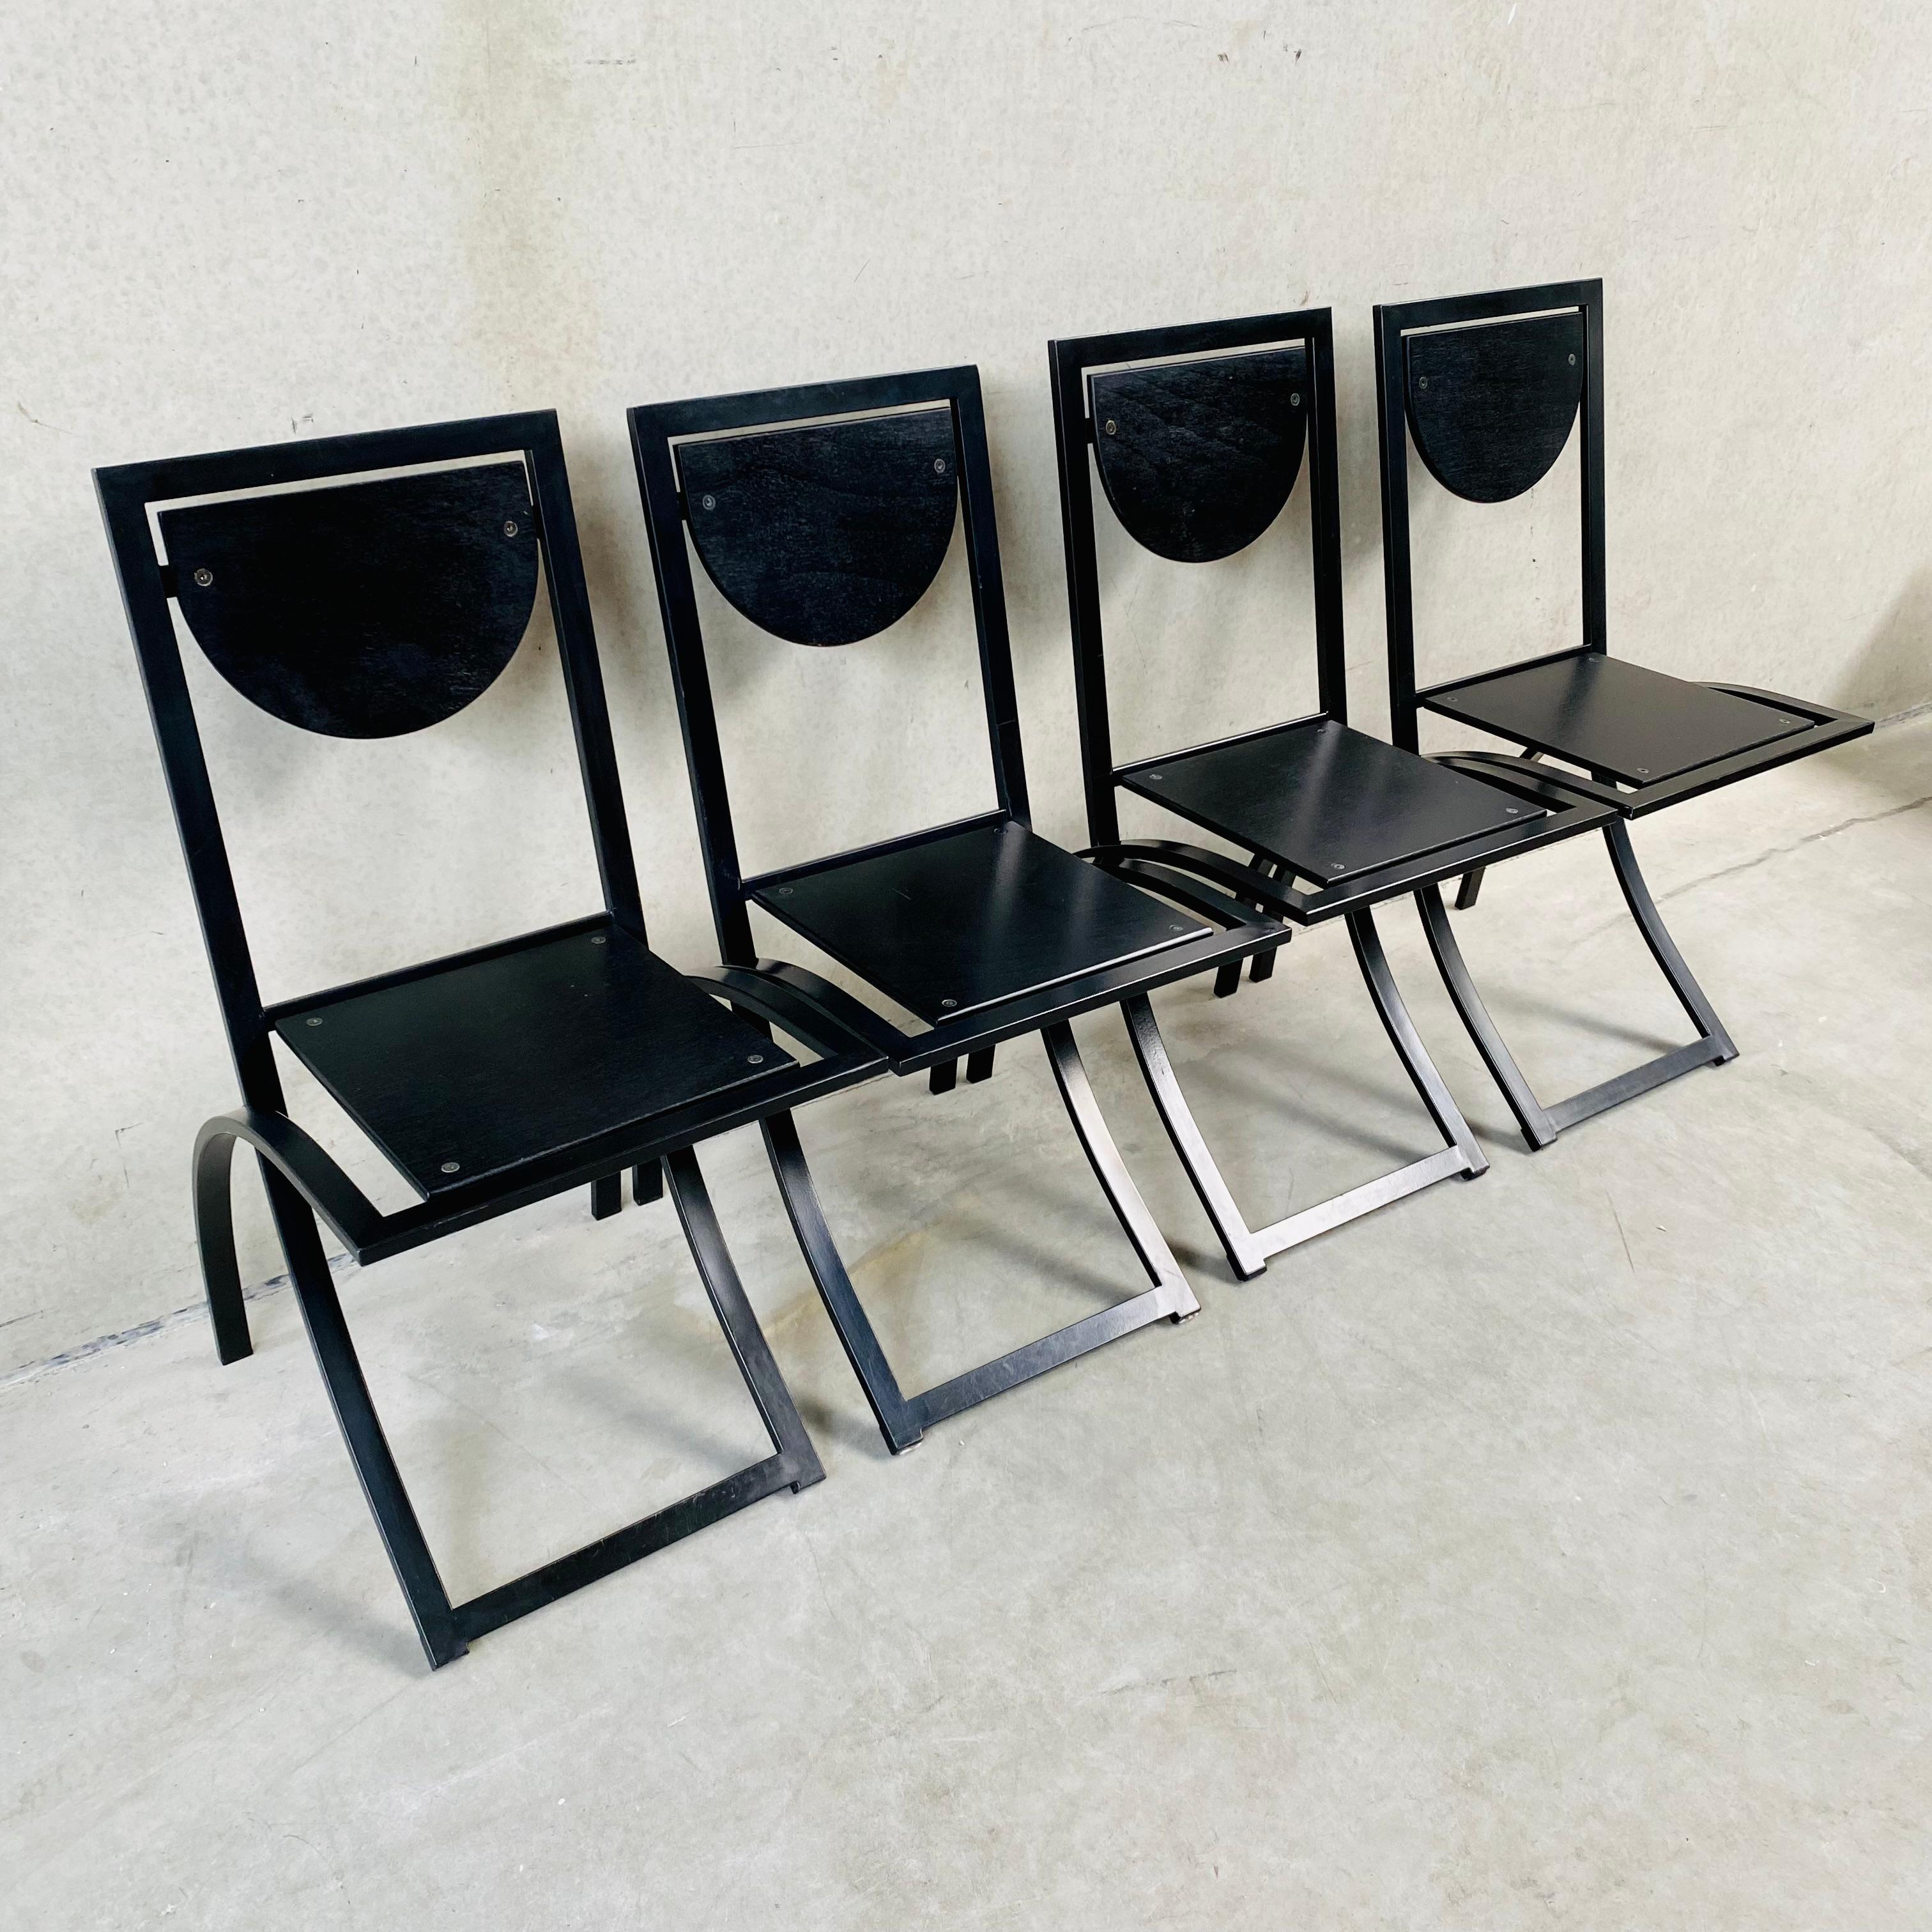 4 x KFF Black Smoked Oak Dining Chairs by Karl Friedrich Förster 1980 For Sale 1